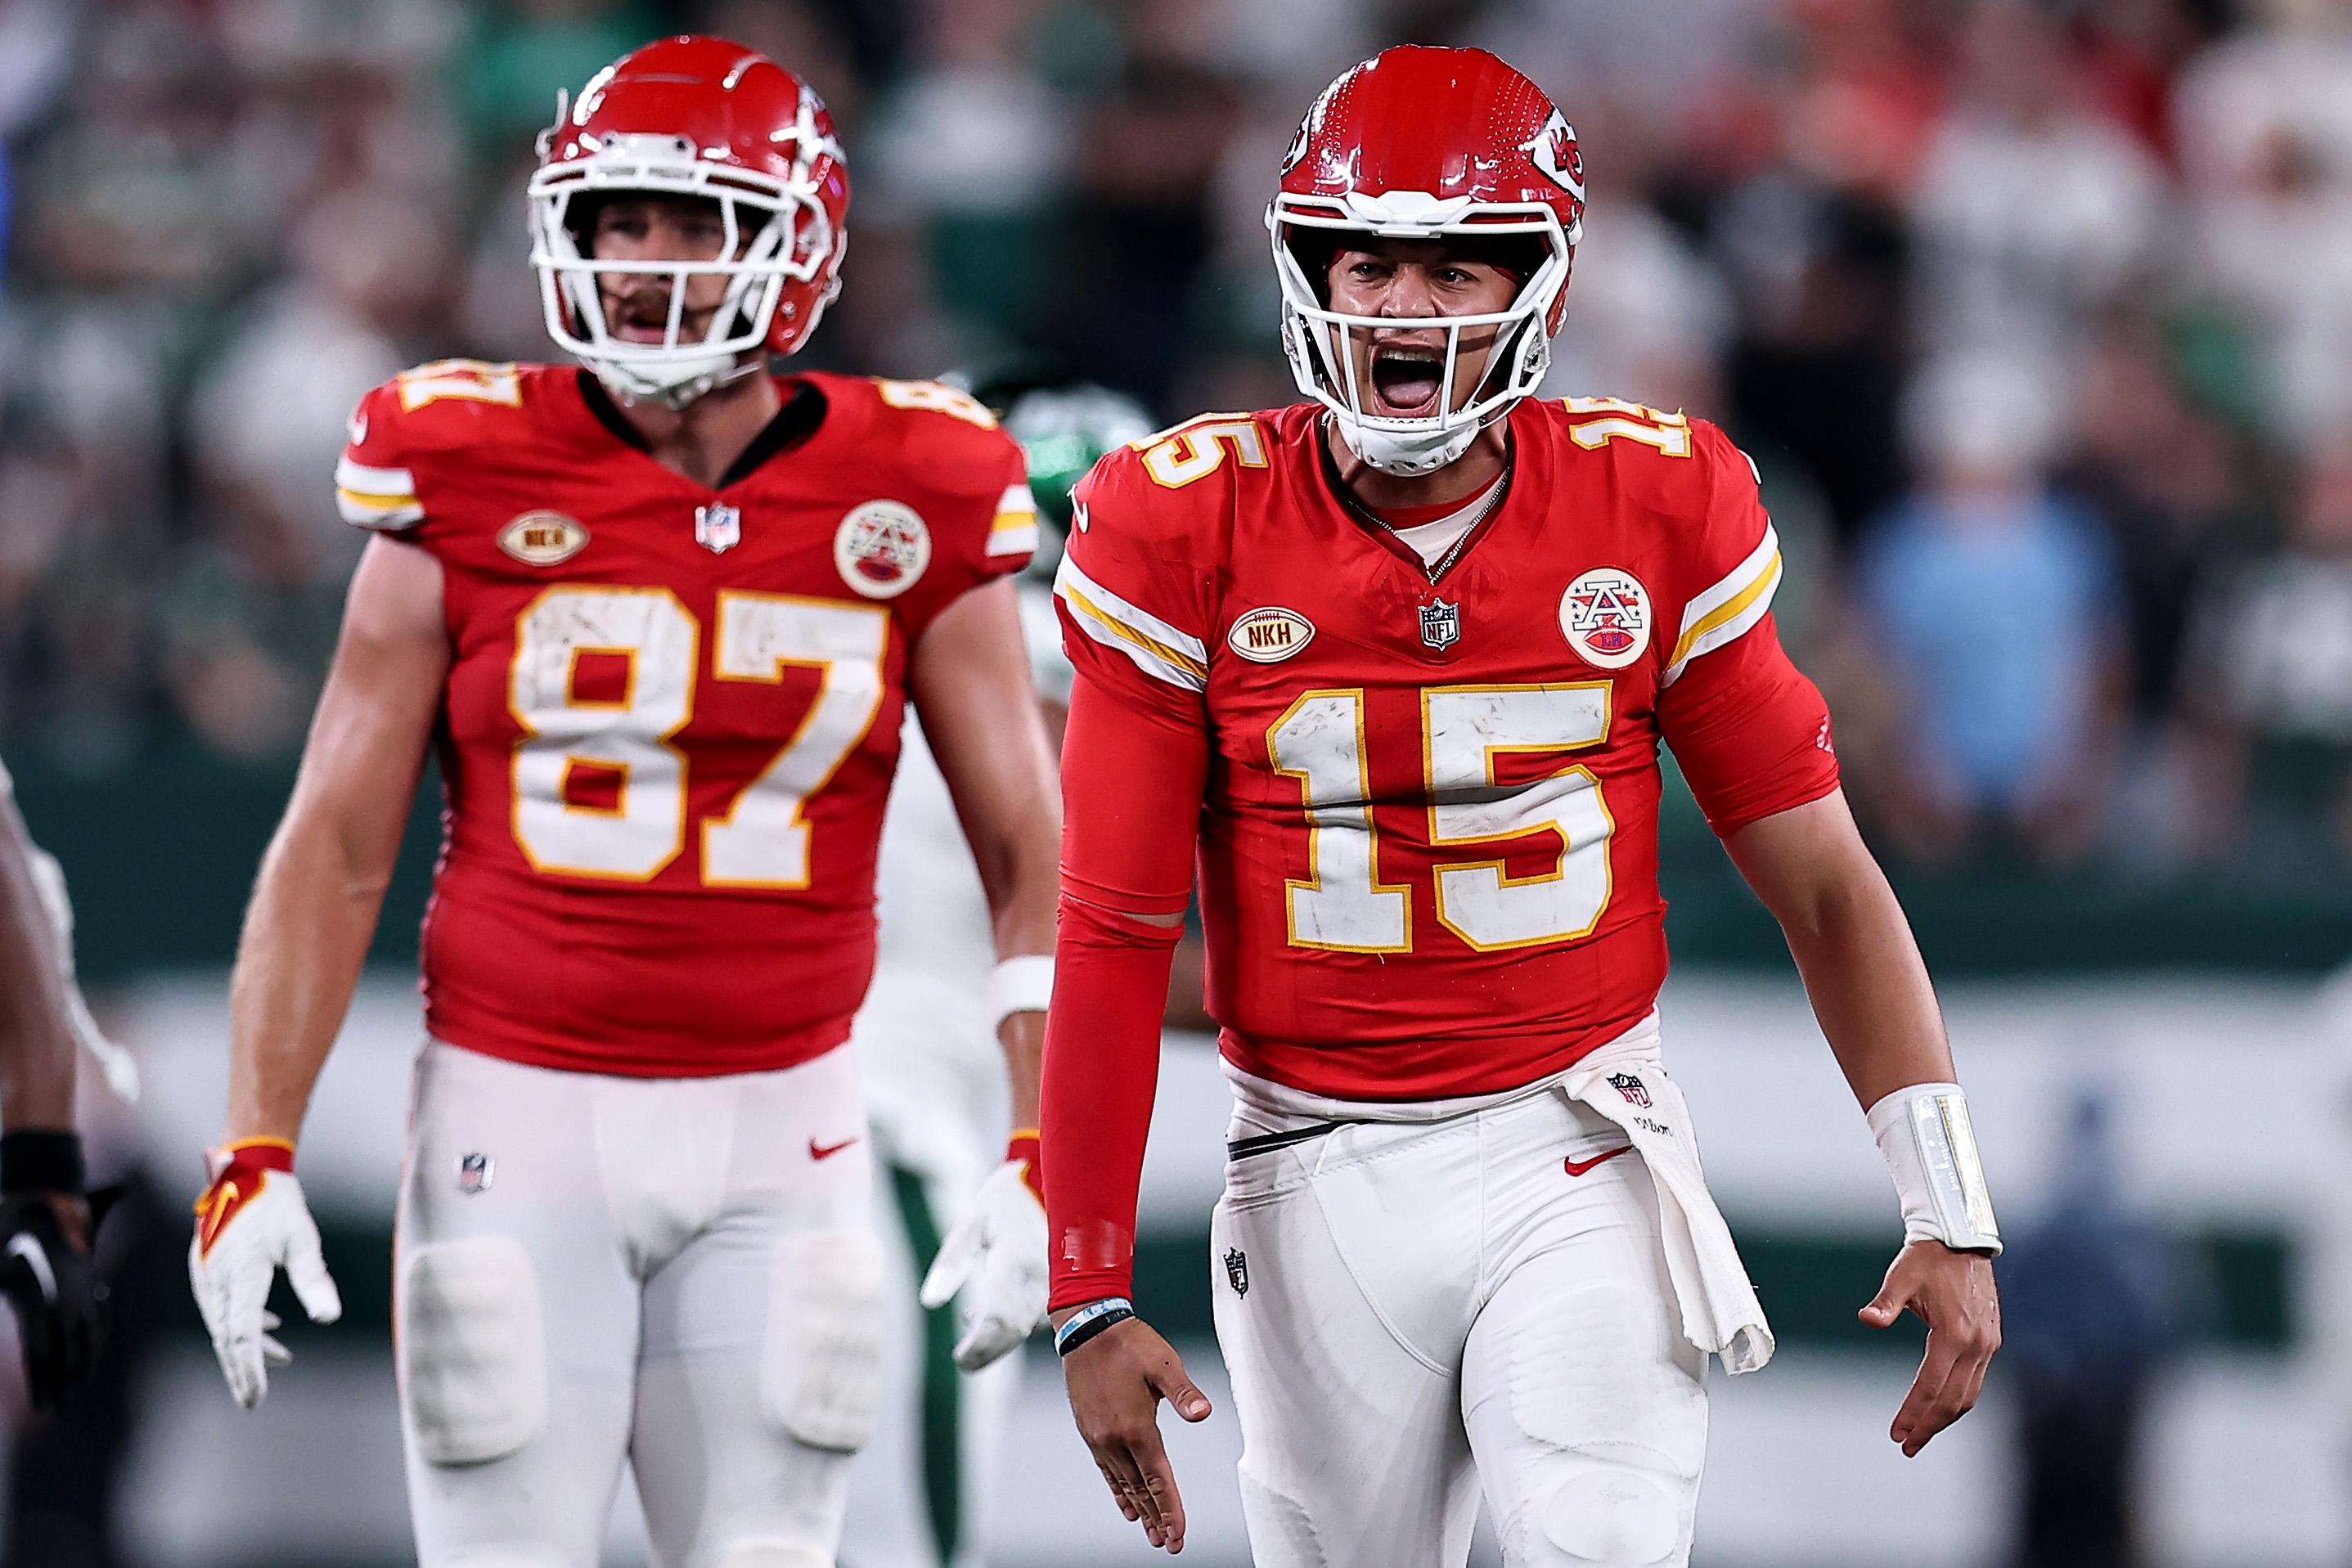 Chiefs vs. Broncos broadcast map: Will you be able to watch on TV?